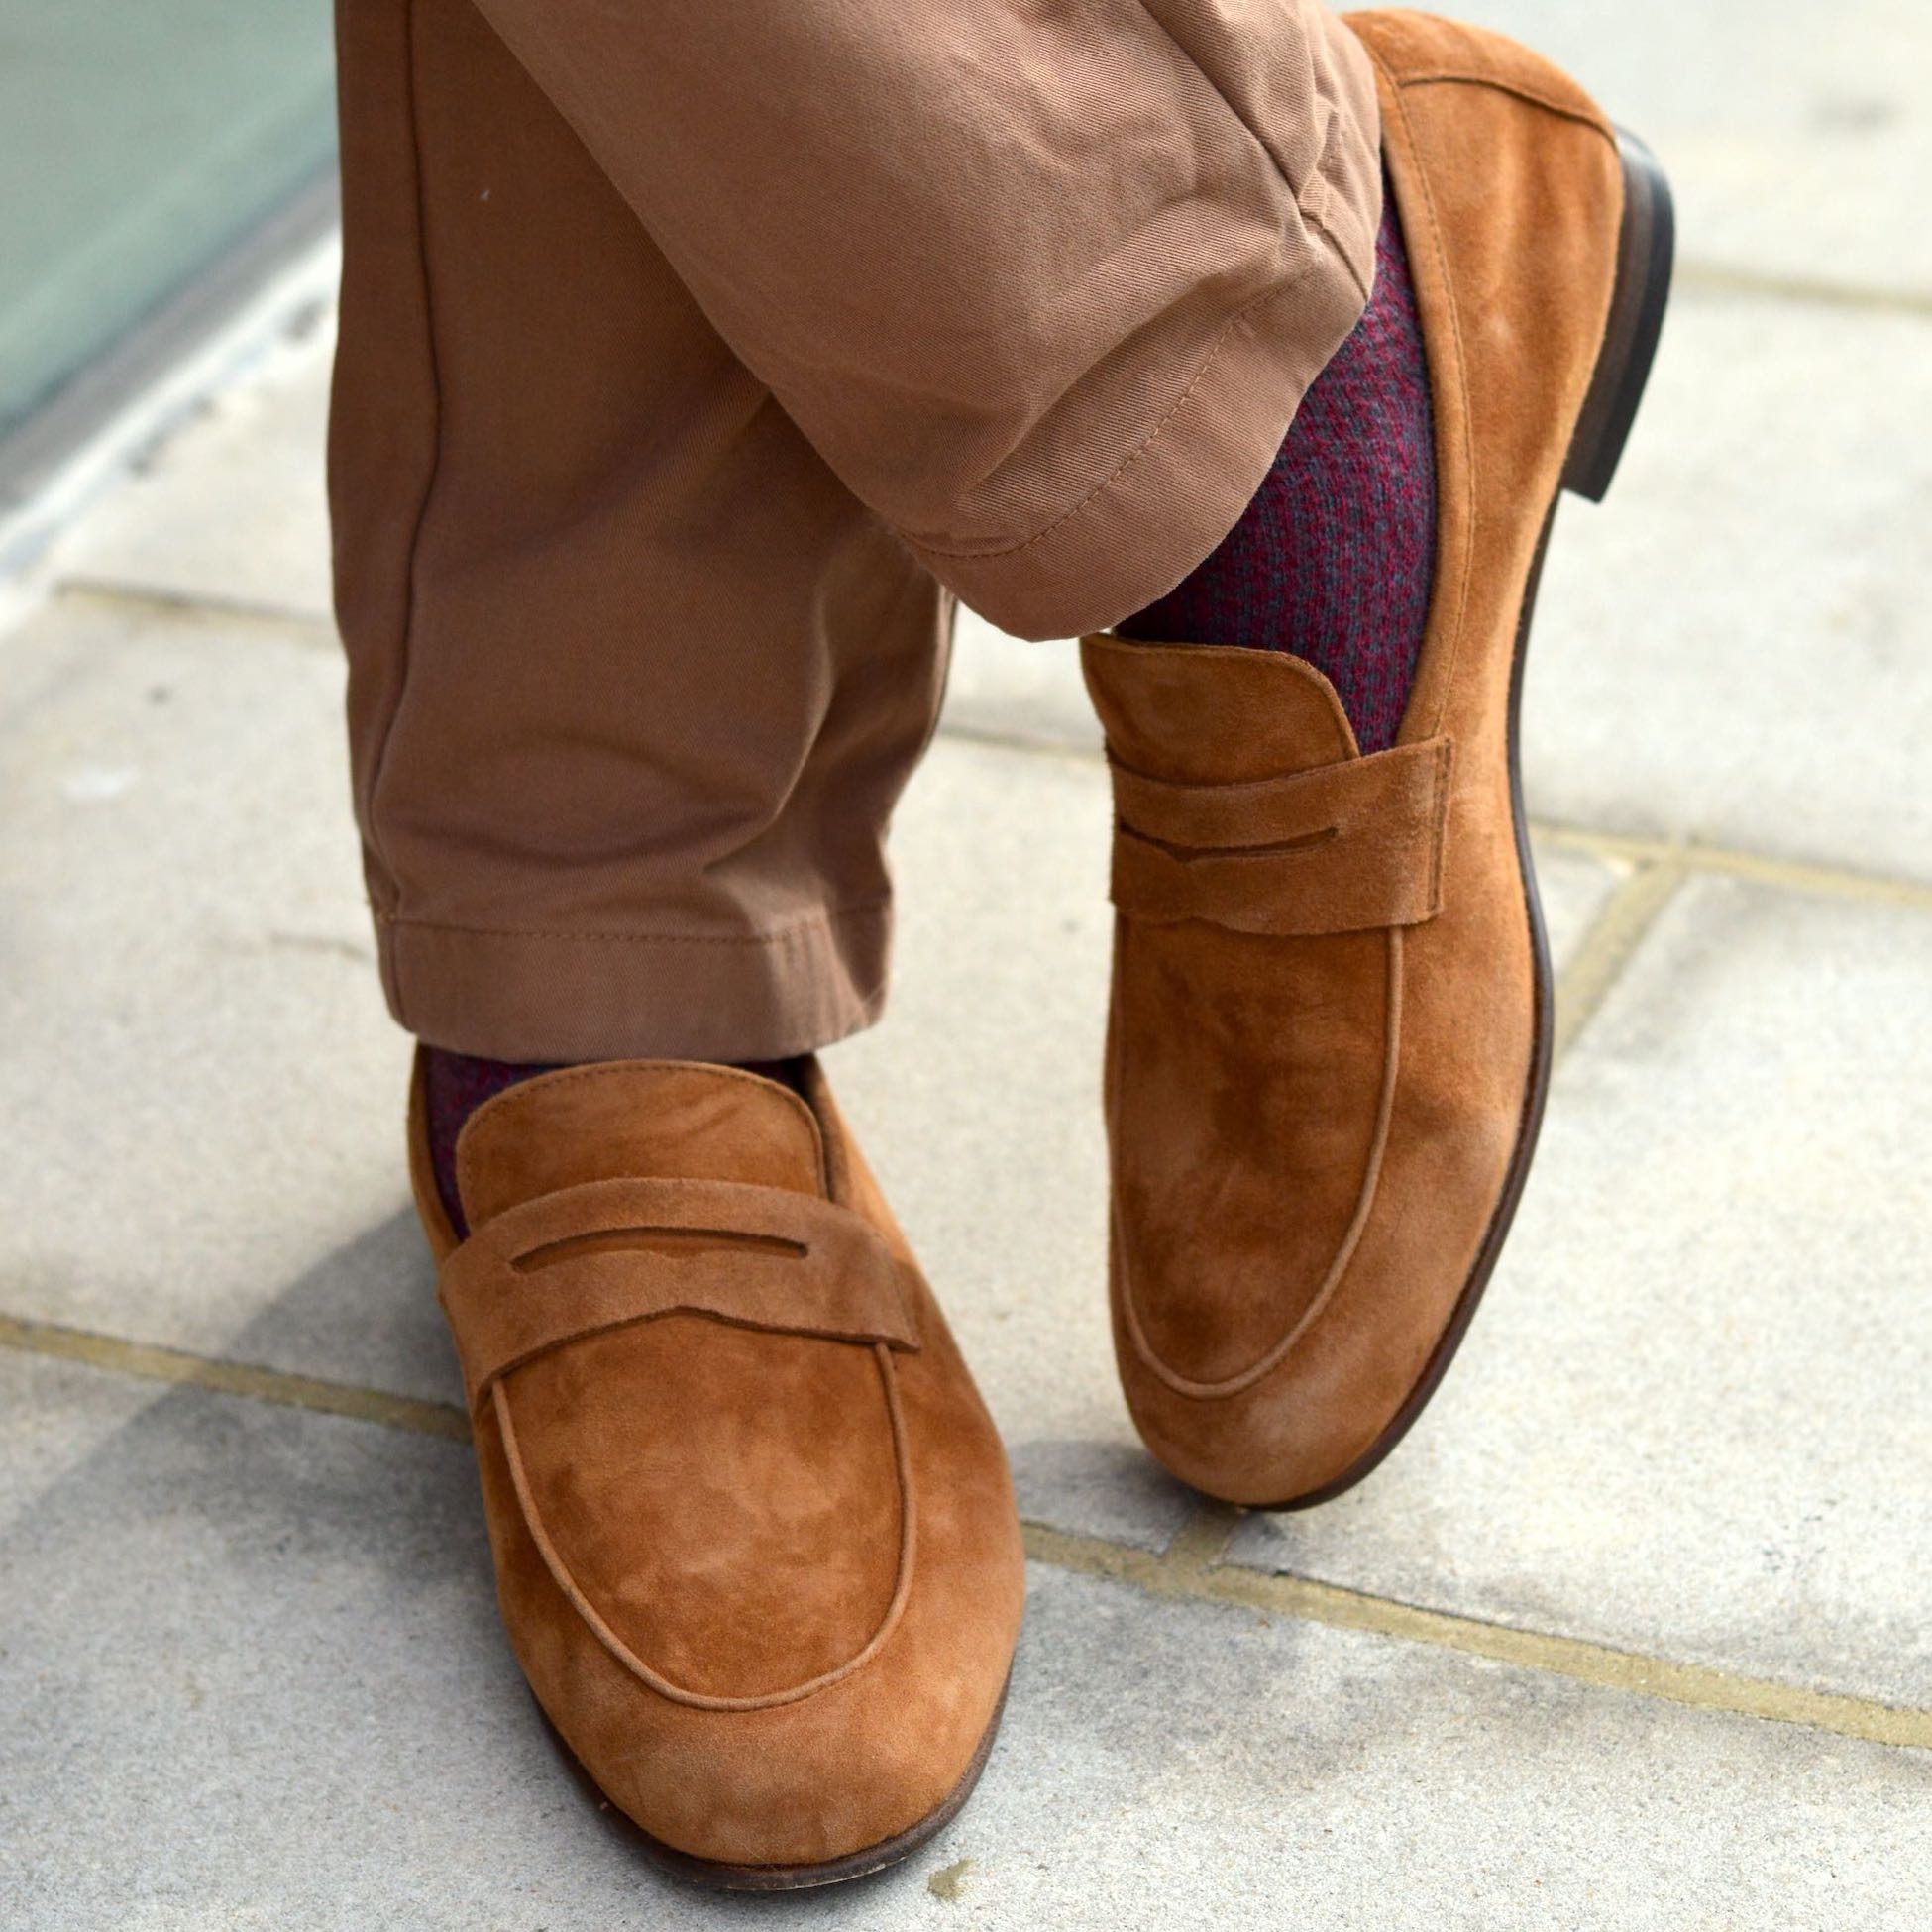 The 9 Men's Shoes for Summer Modest Man